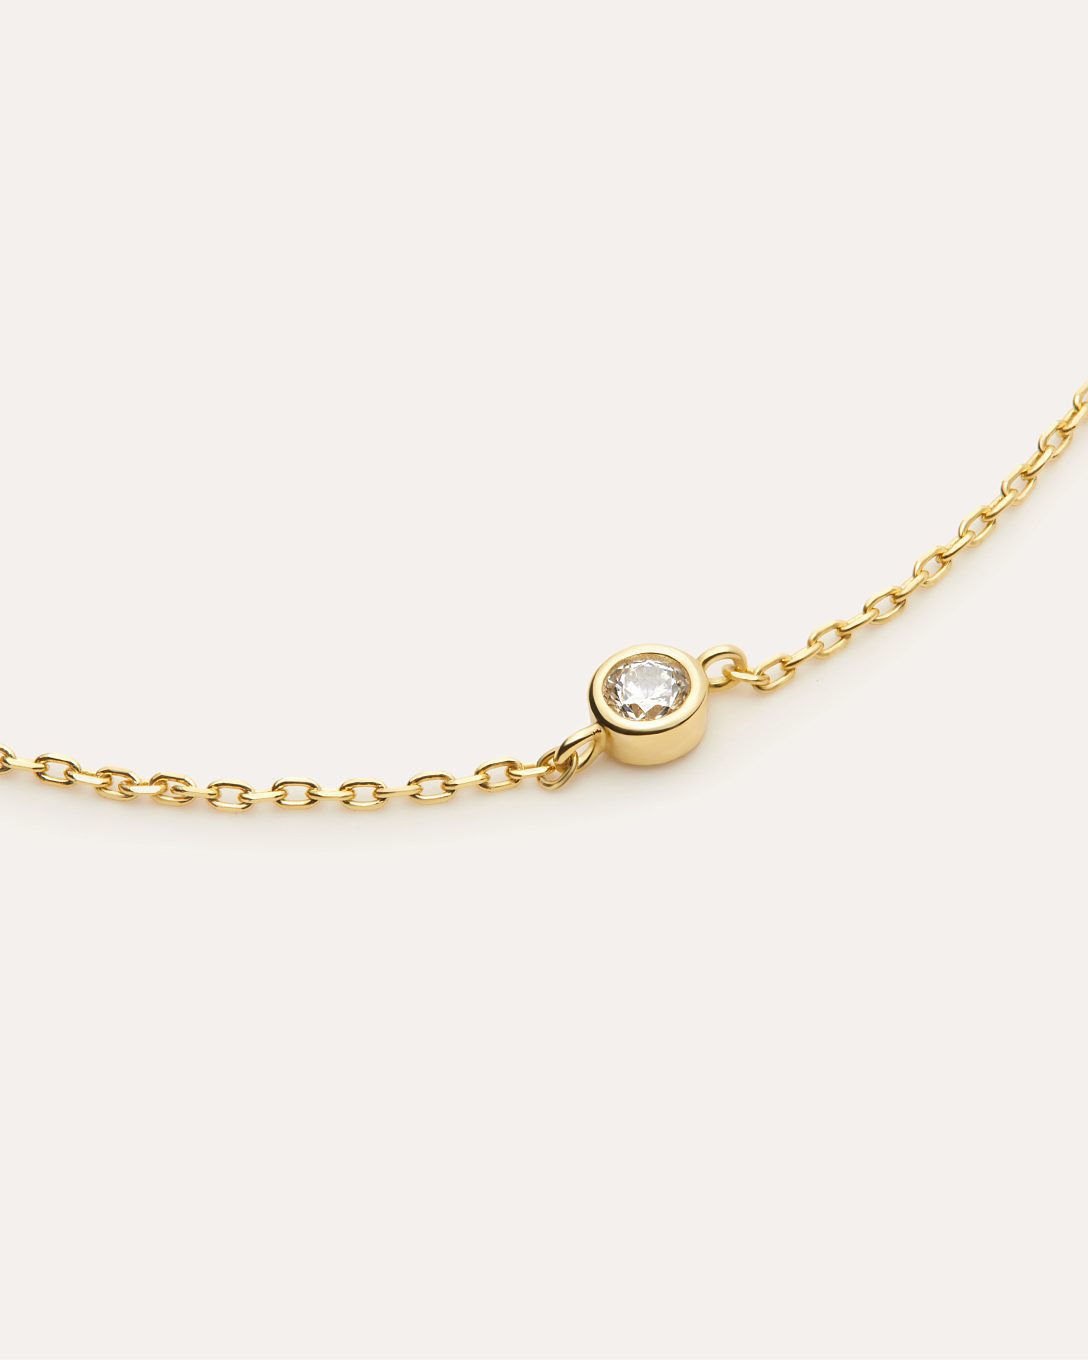 14KT Gold Plated bracelet with Cubic Zirconia